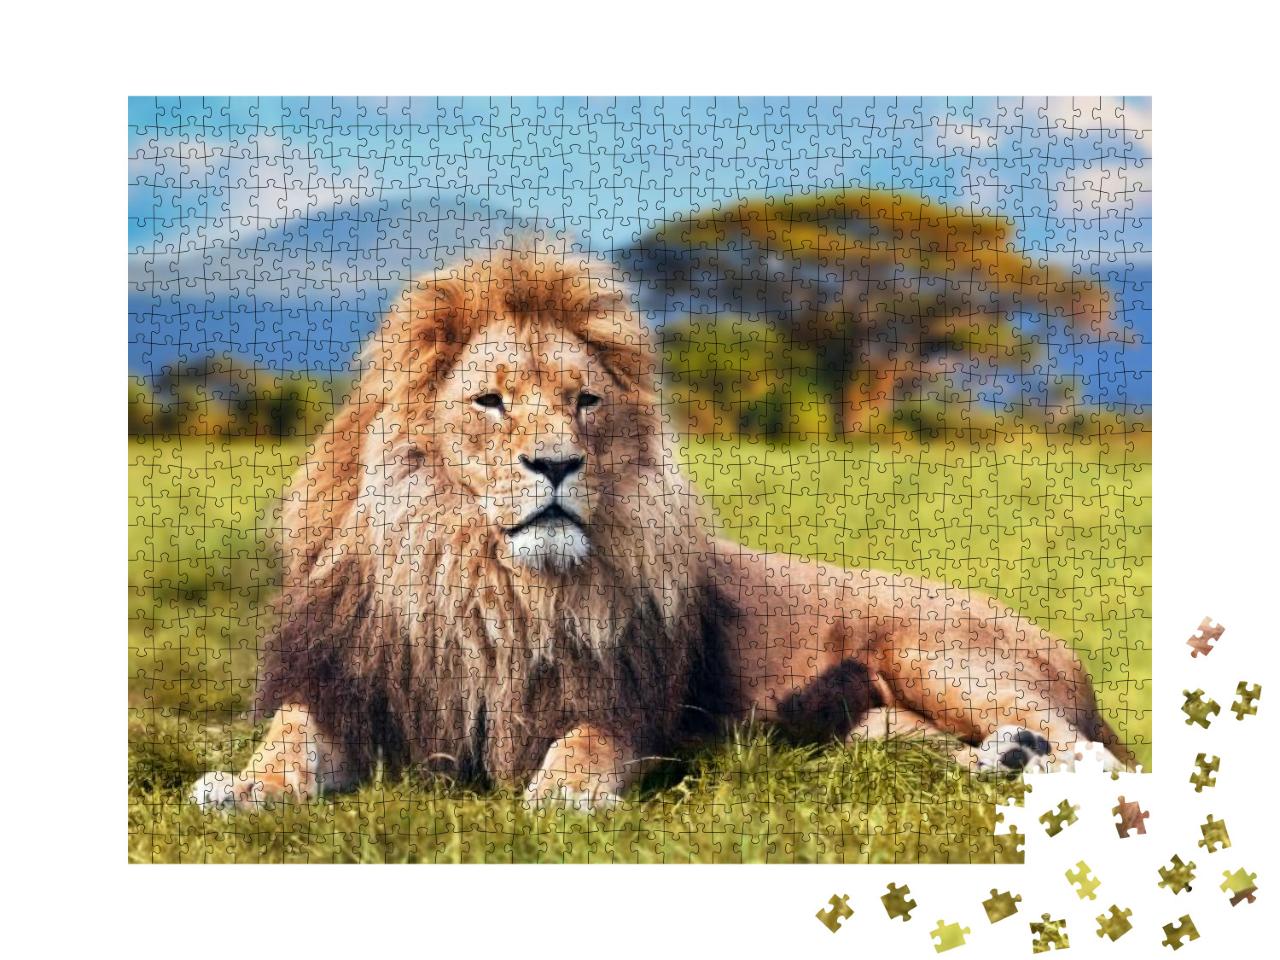 Big Lion Lying on Savannah Grass. Landscape with Characte... Jigsaw Puzzle with 1000 pieces